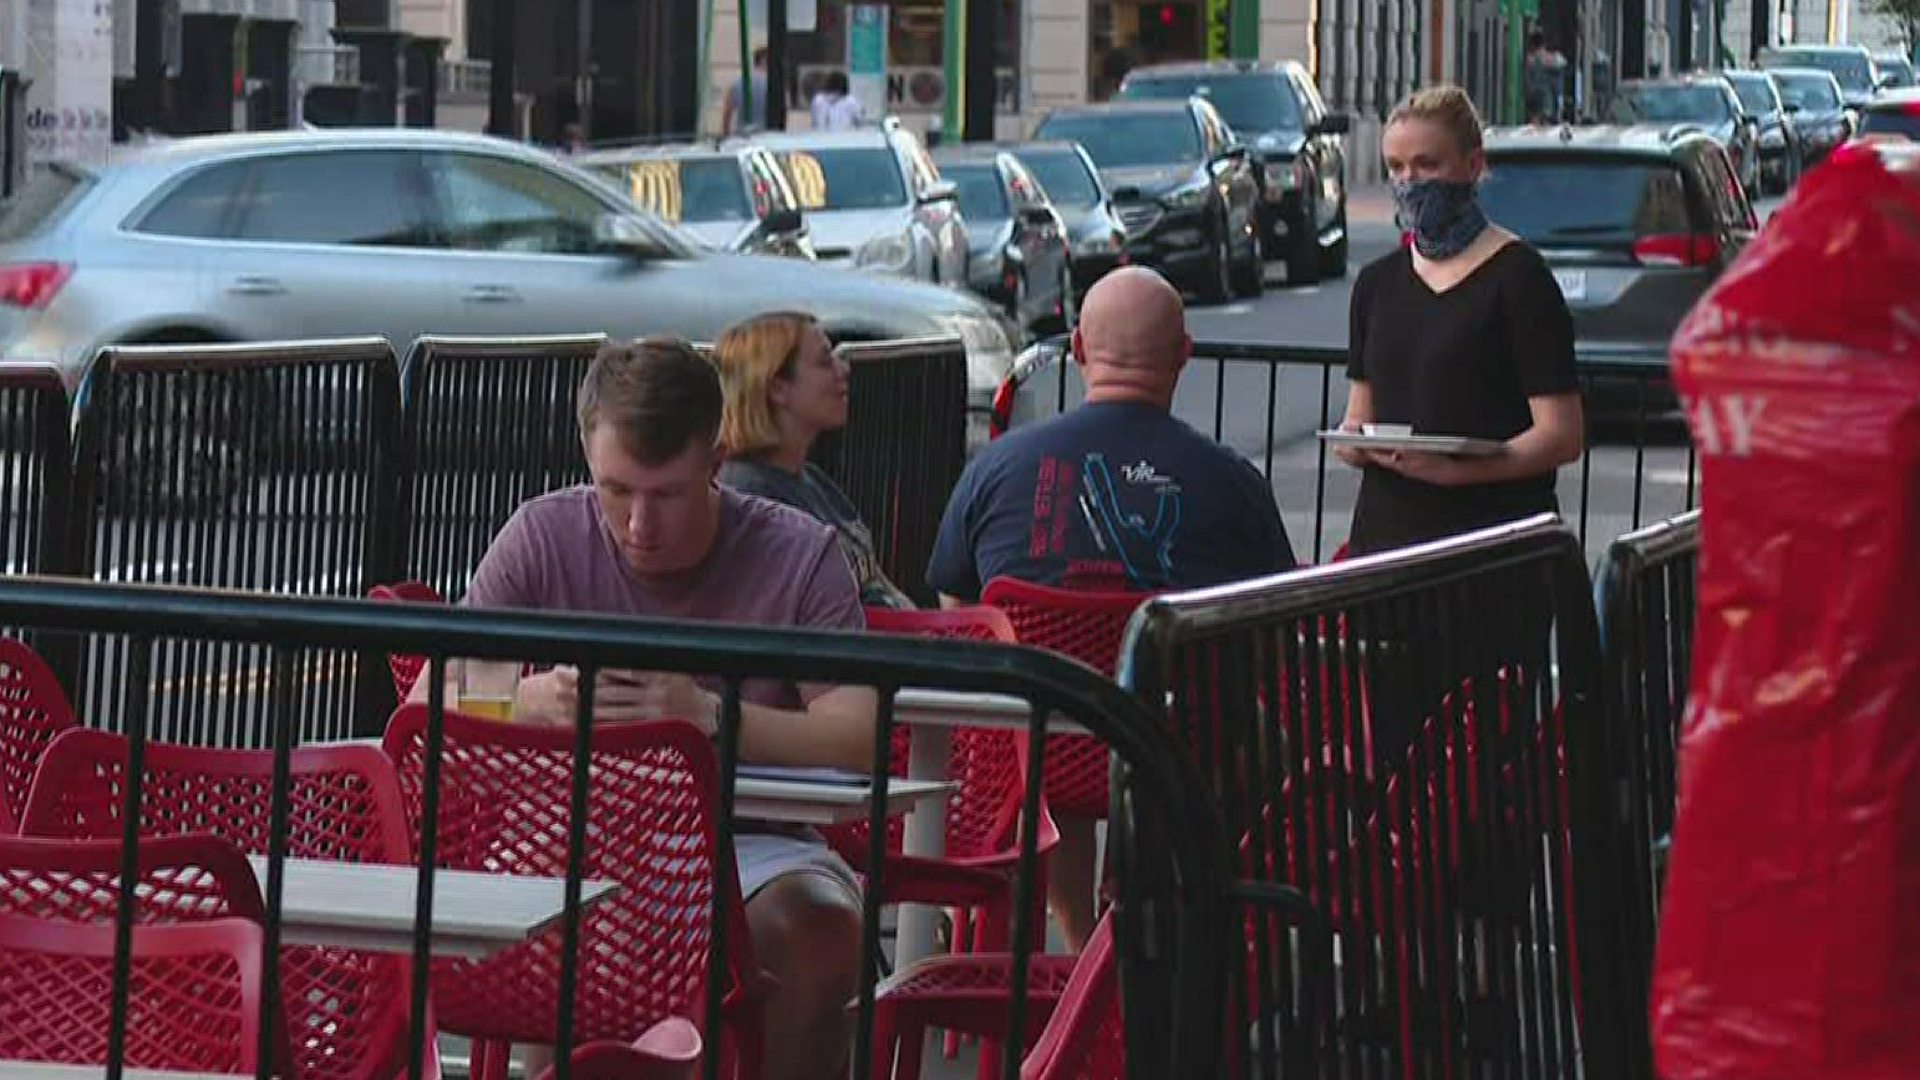 13News Now Angelo Vargas spoke with a few people in downtown Norfolk and Virginia Beach who were excited to get outside for the first day of Phase One reopenings.